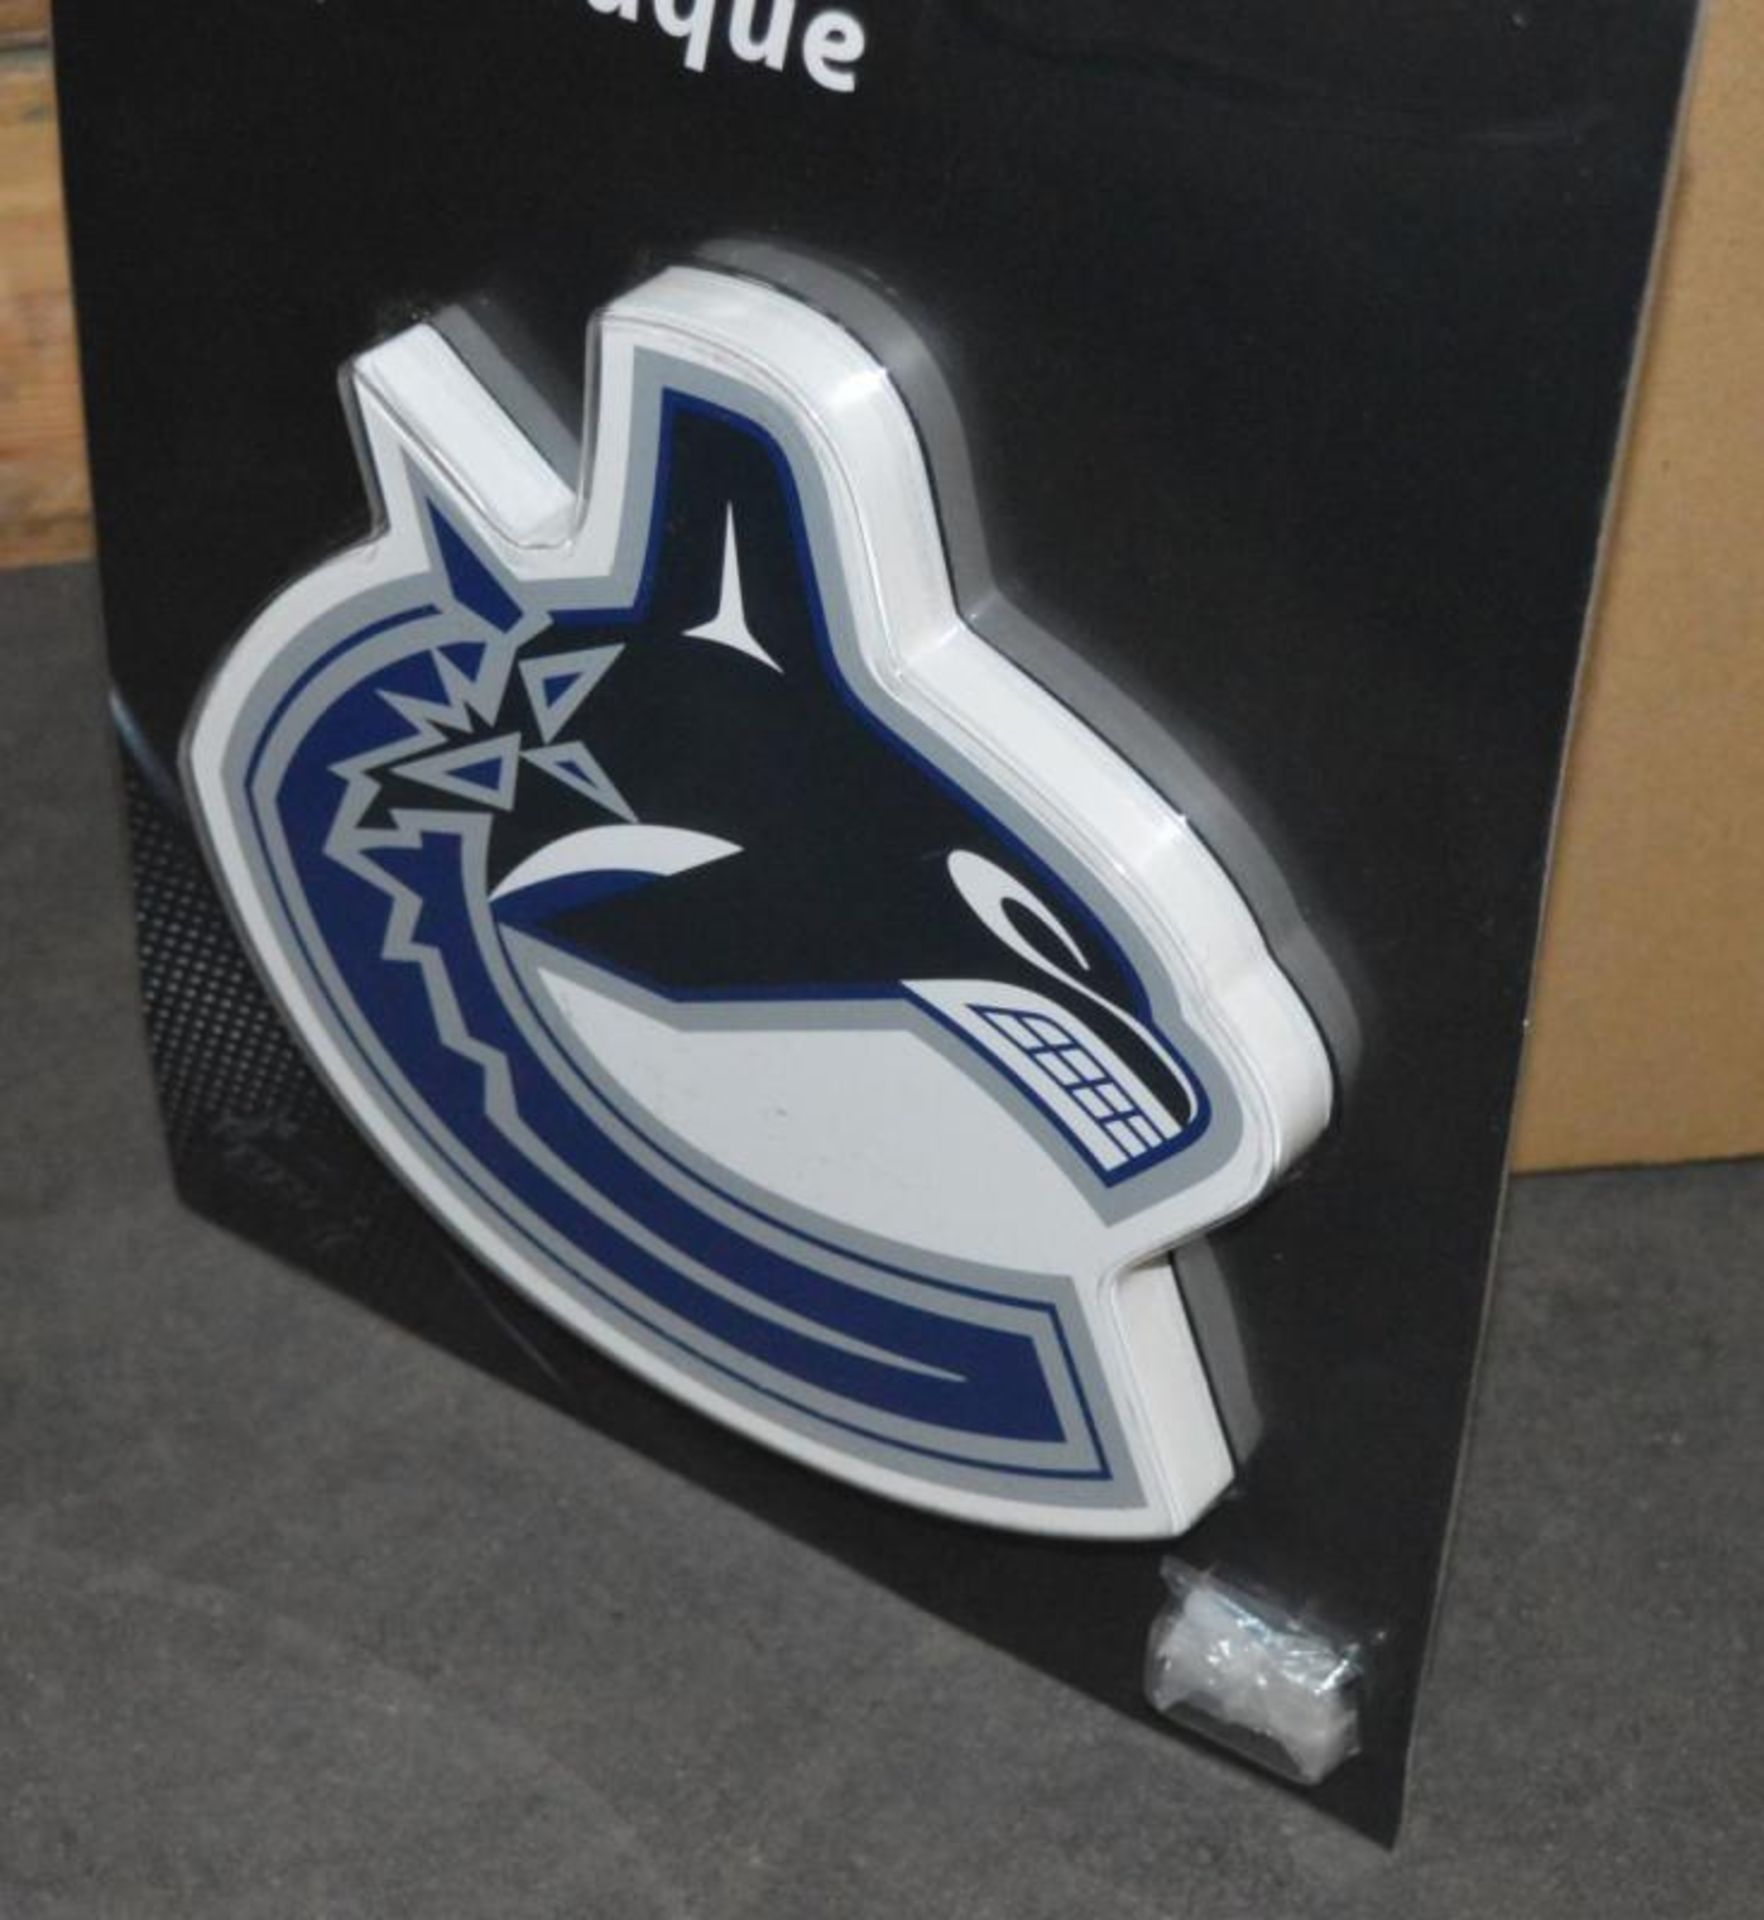 12 x 9" NHL Hockey Vancouver Canucks Plaques - New/Boxed - CL185 - Ref: DRT0753 - Location: Stoke-on - Image 7 of 7